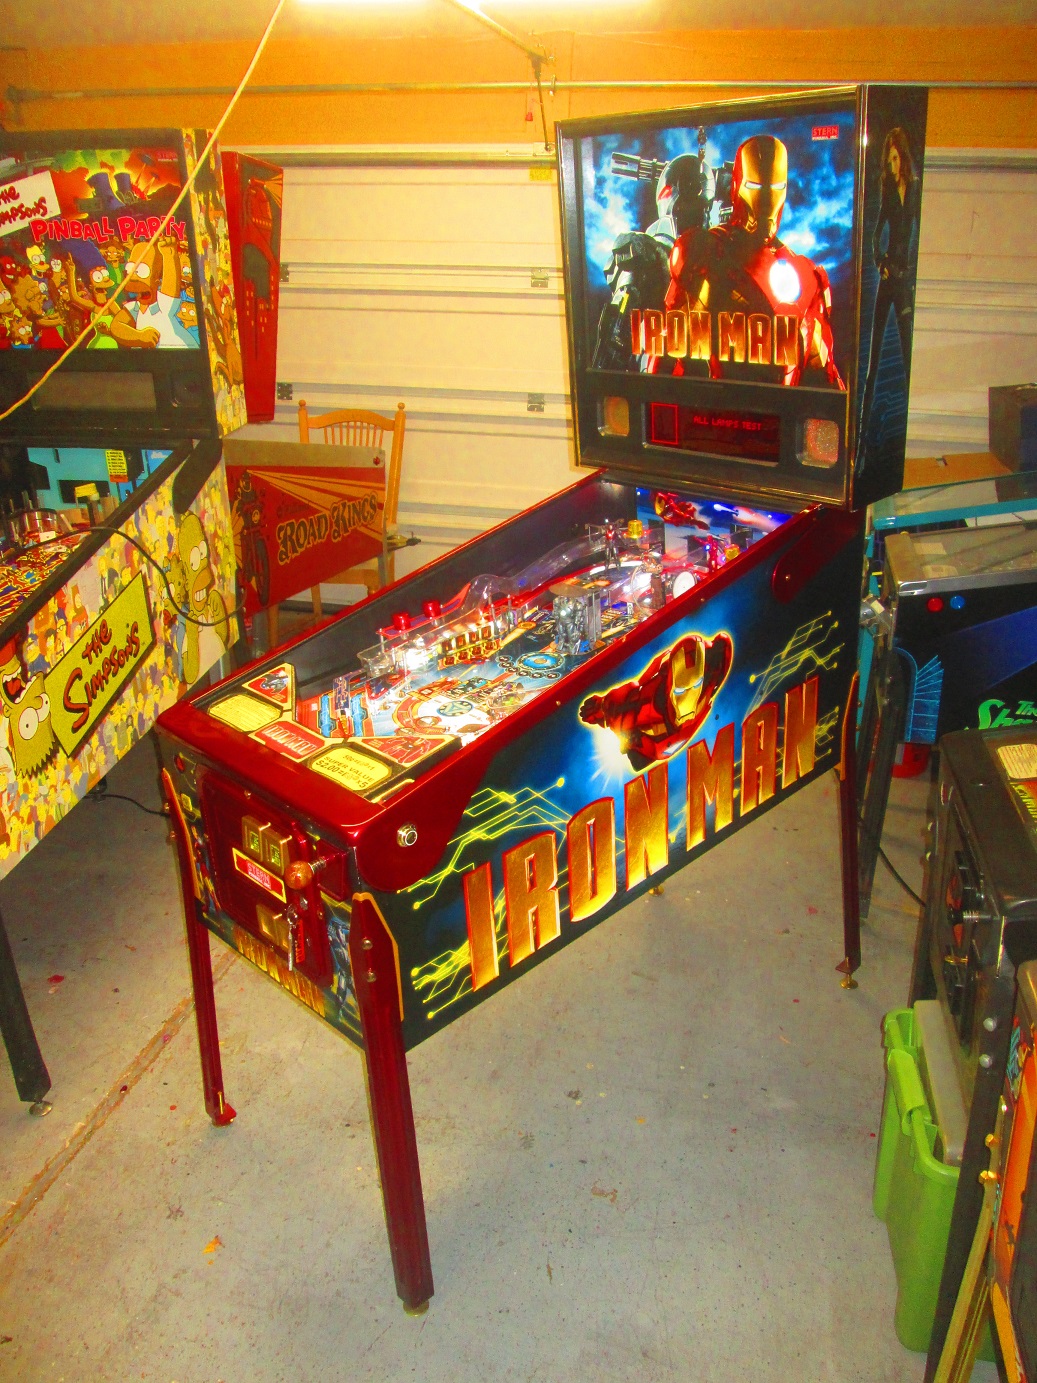 We gave it a full shop job, installing updated LEDs throughout. We pulled everything off the playfield, to be tumbled, buffed, polished, washed, or otherwise cleaned.